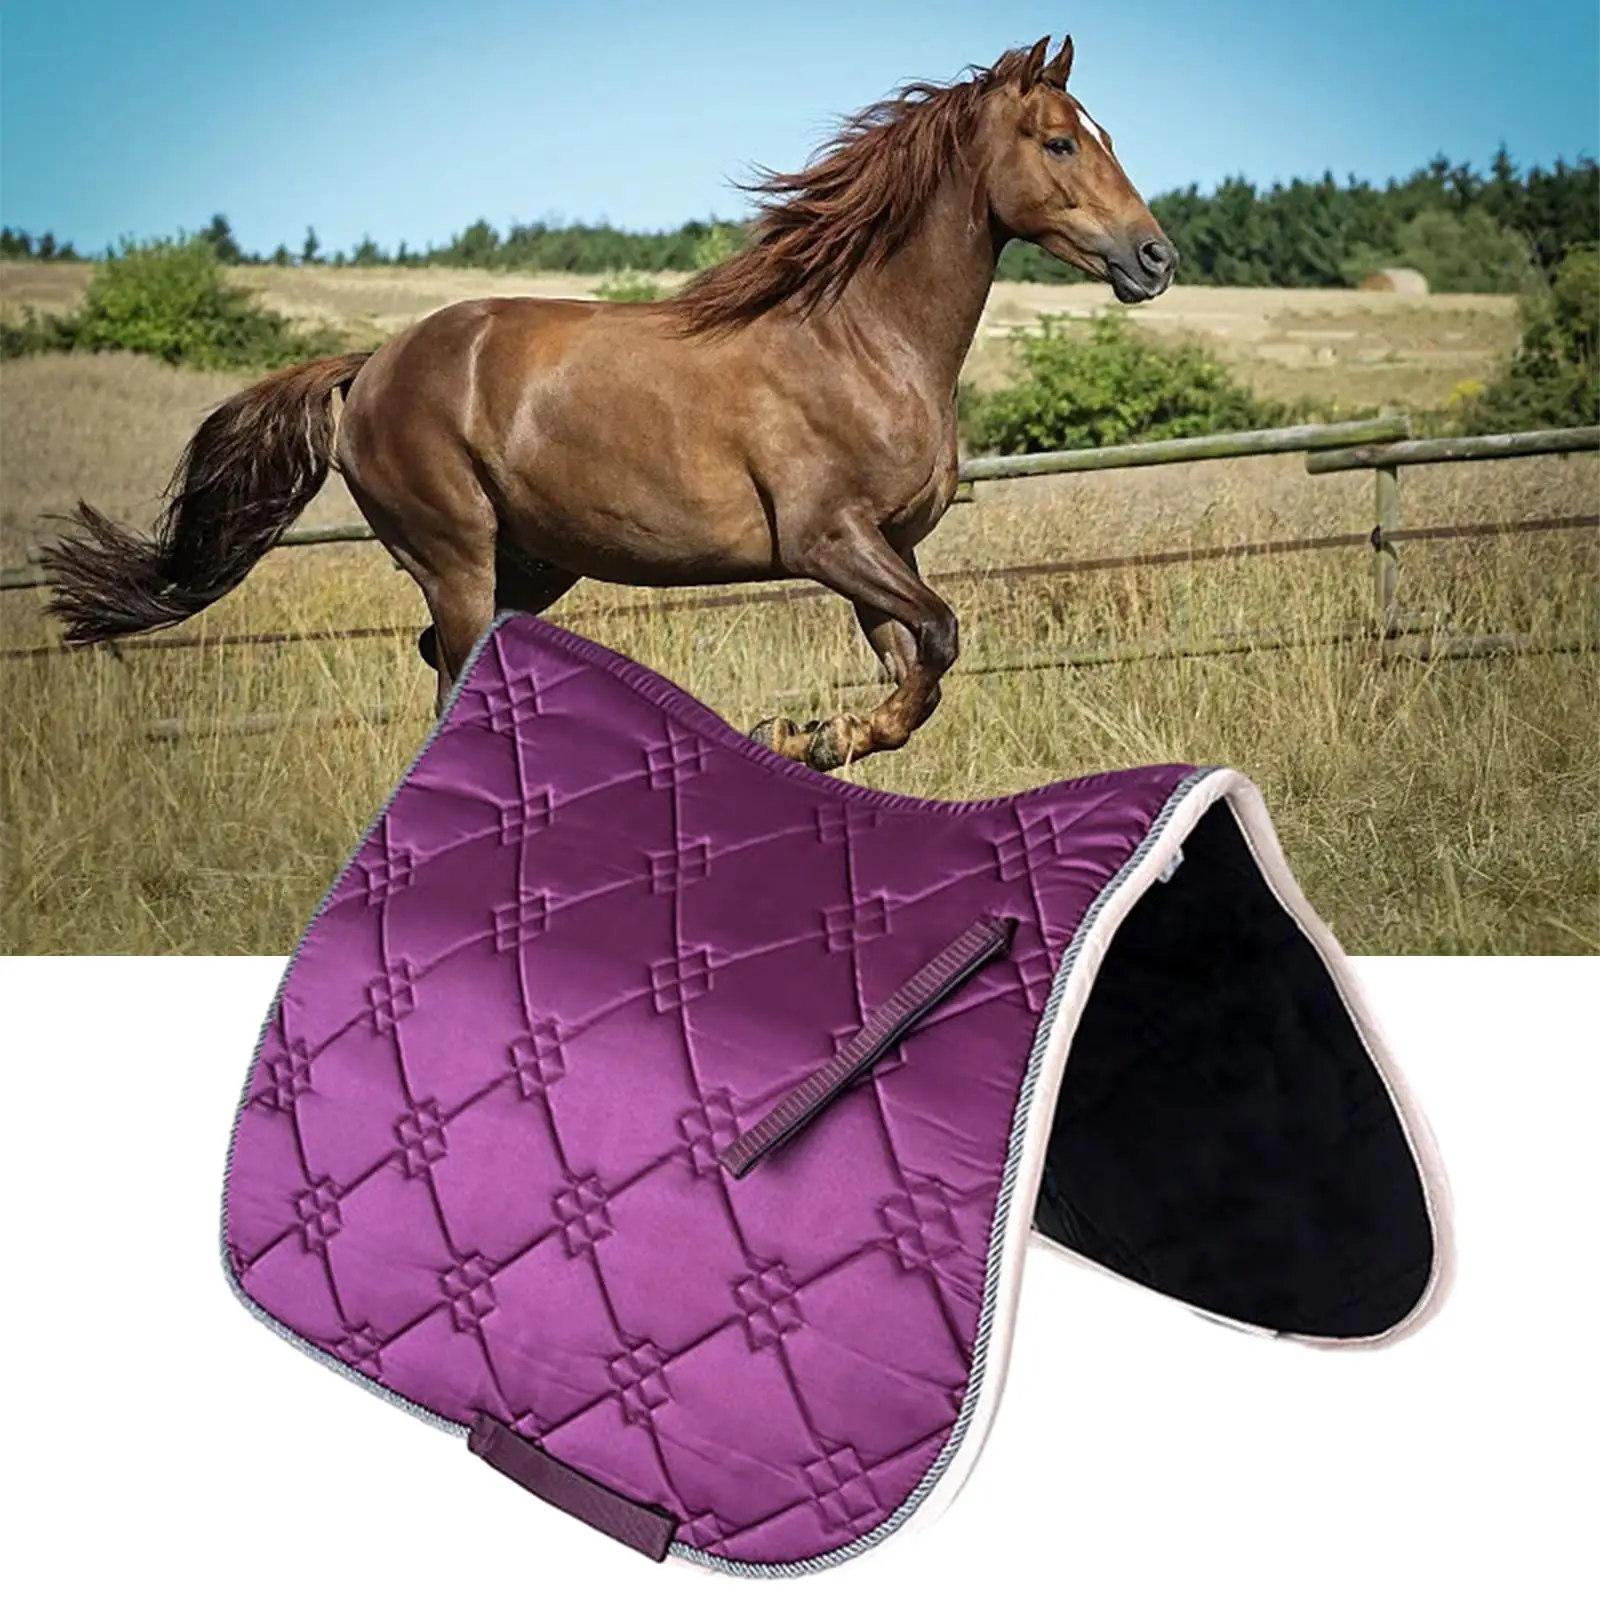 Saddle Pad Breathable Padding Portable Protector Lightweight Equestrian Riding